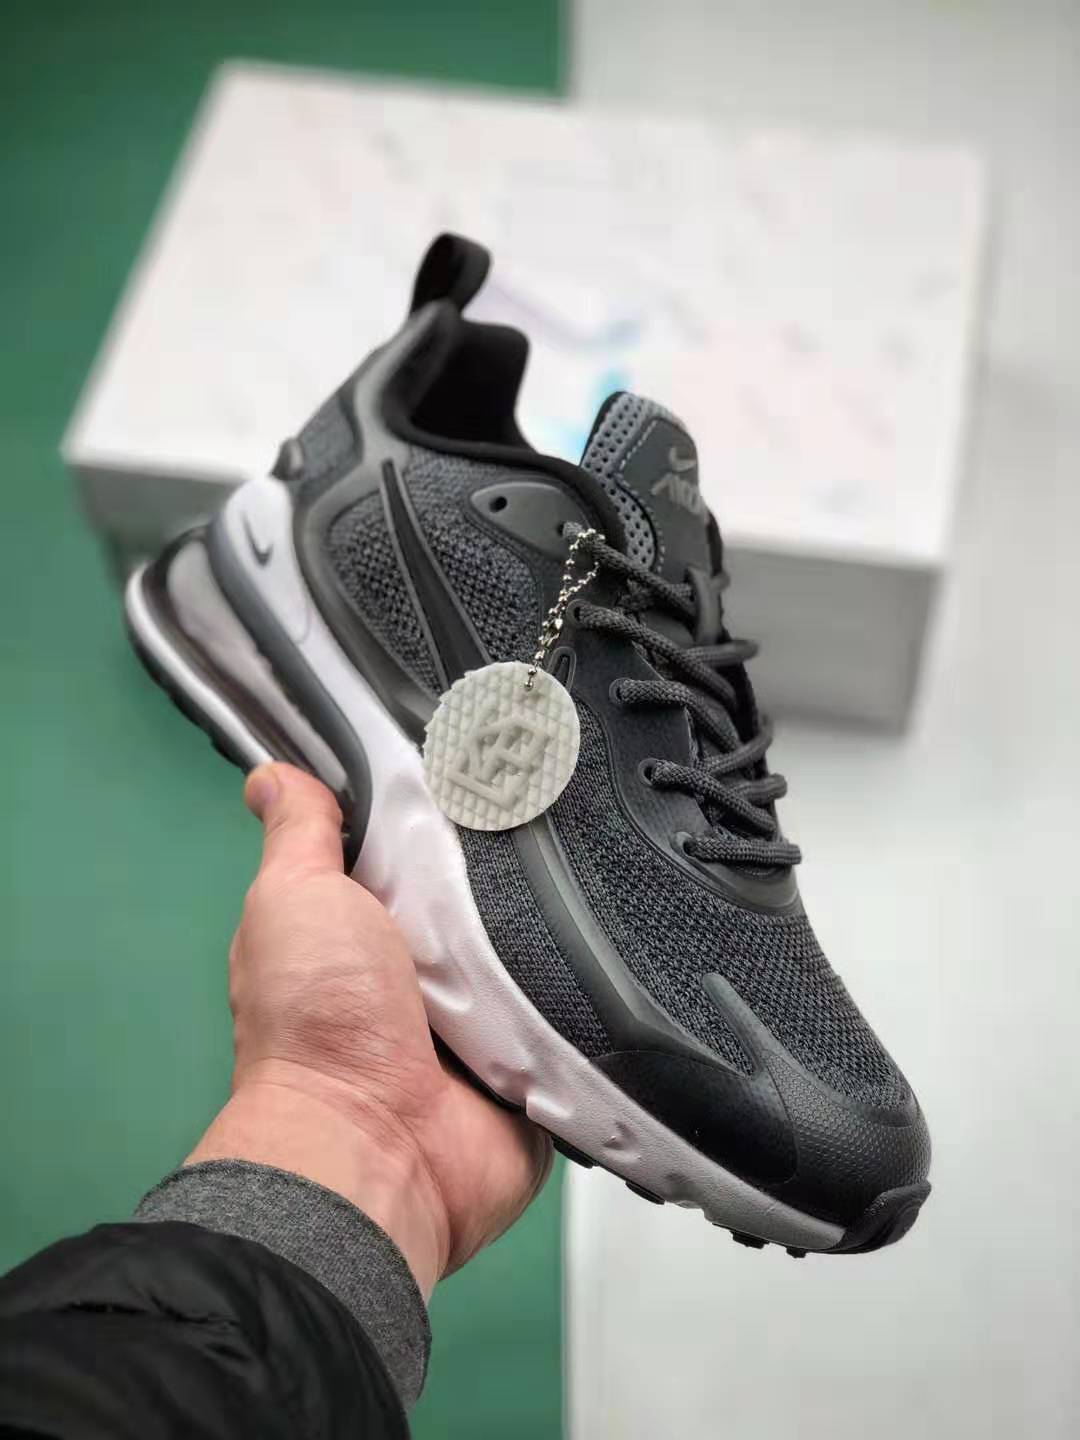 Nike Air Max 270 React Cool Grey White Black AO4971-103 - Stylish and Comfortable Footwear at its Finest